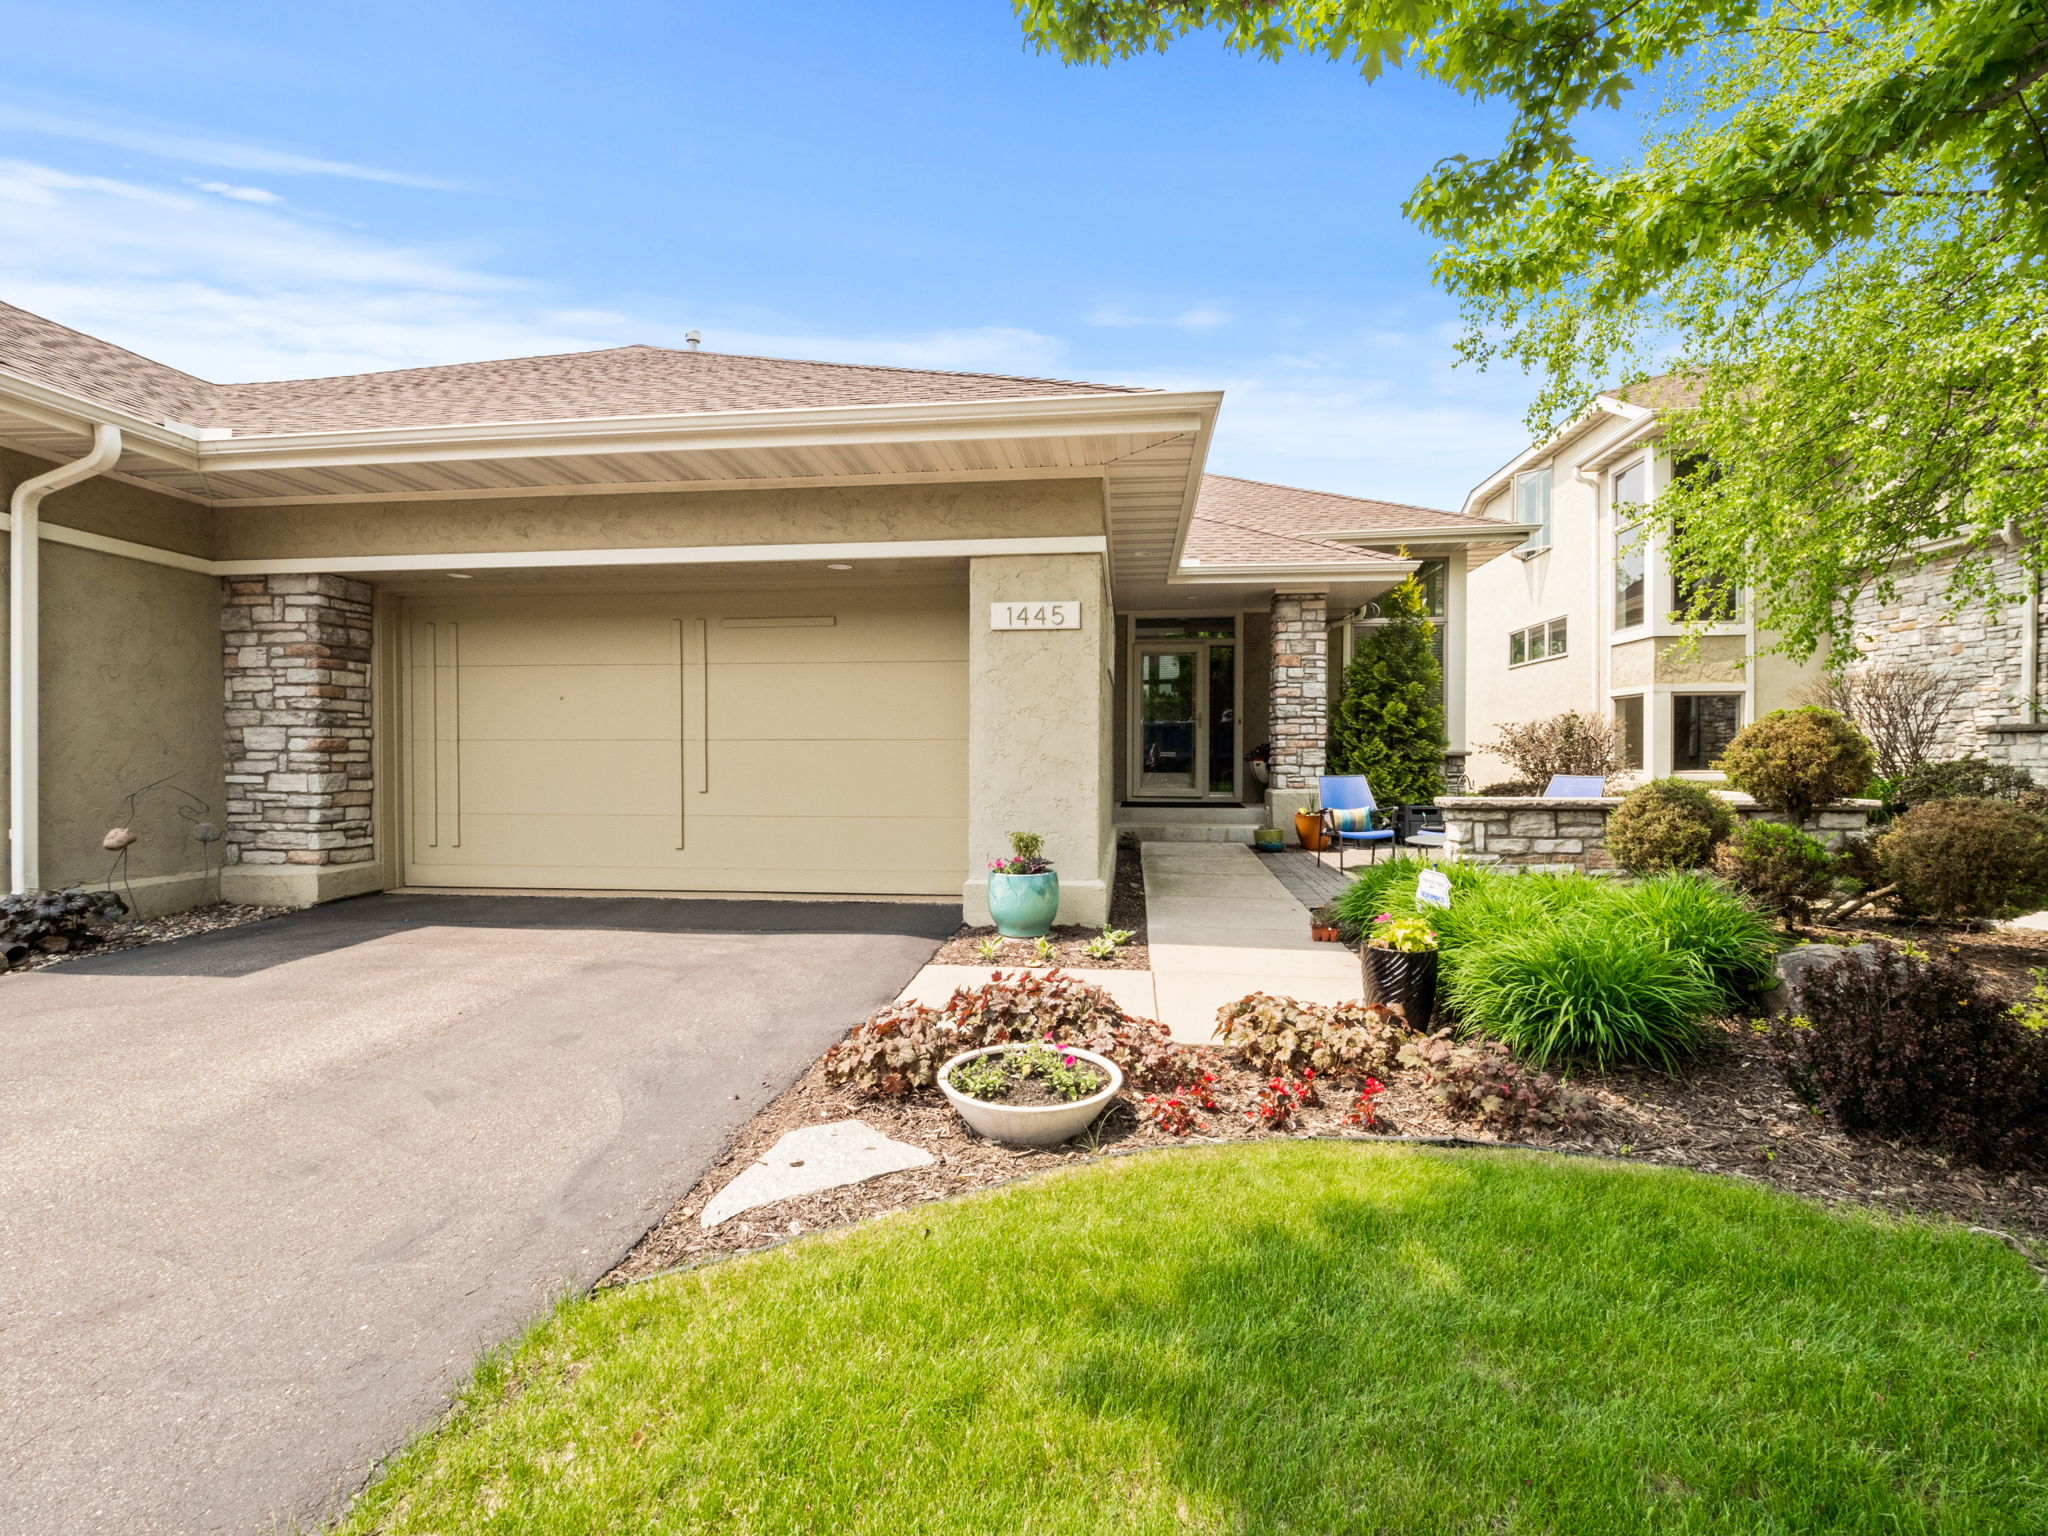  Waterford Drive, Golden Valley, MN 55422, US